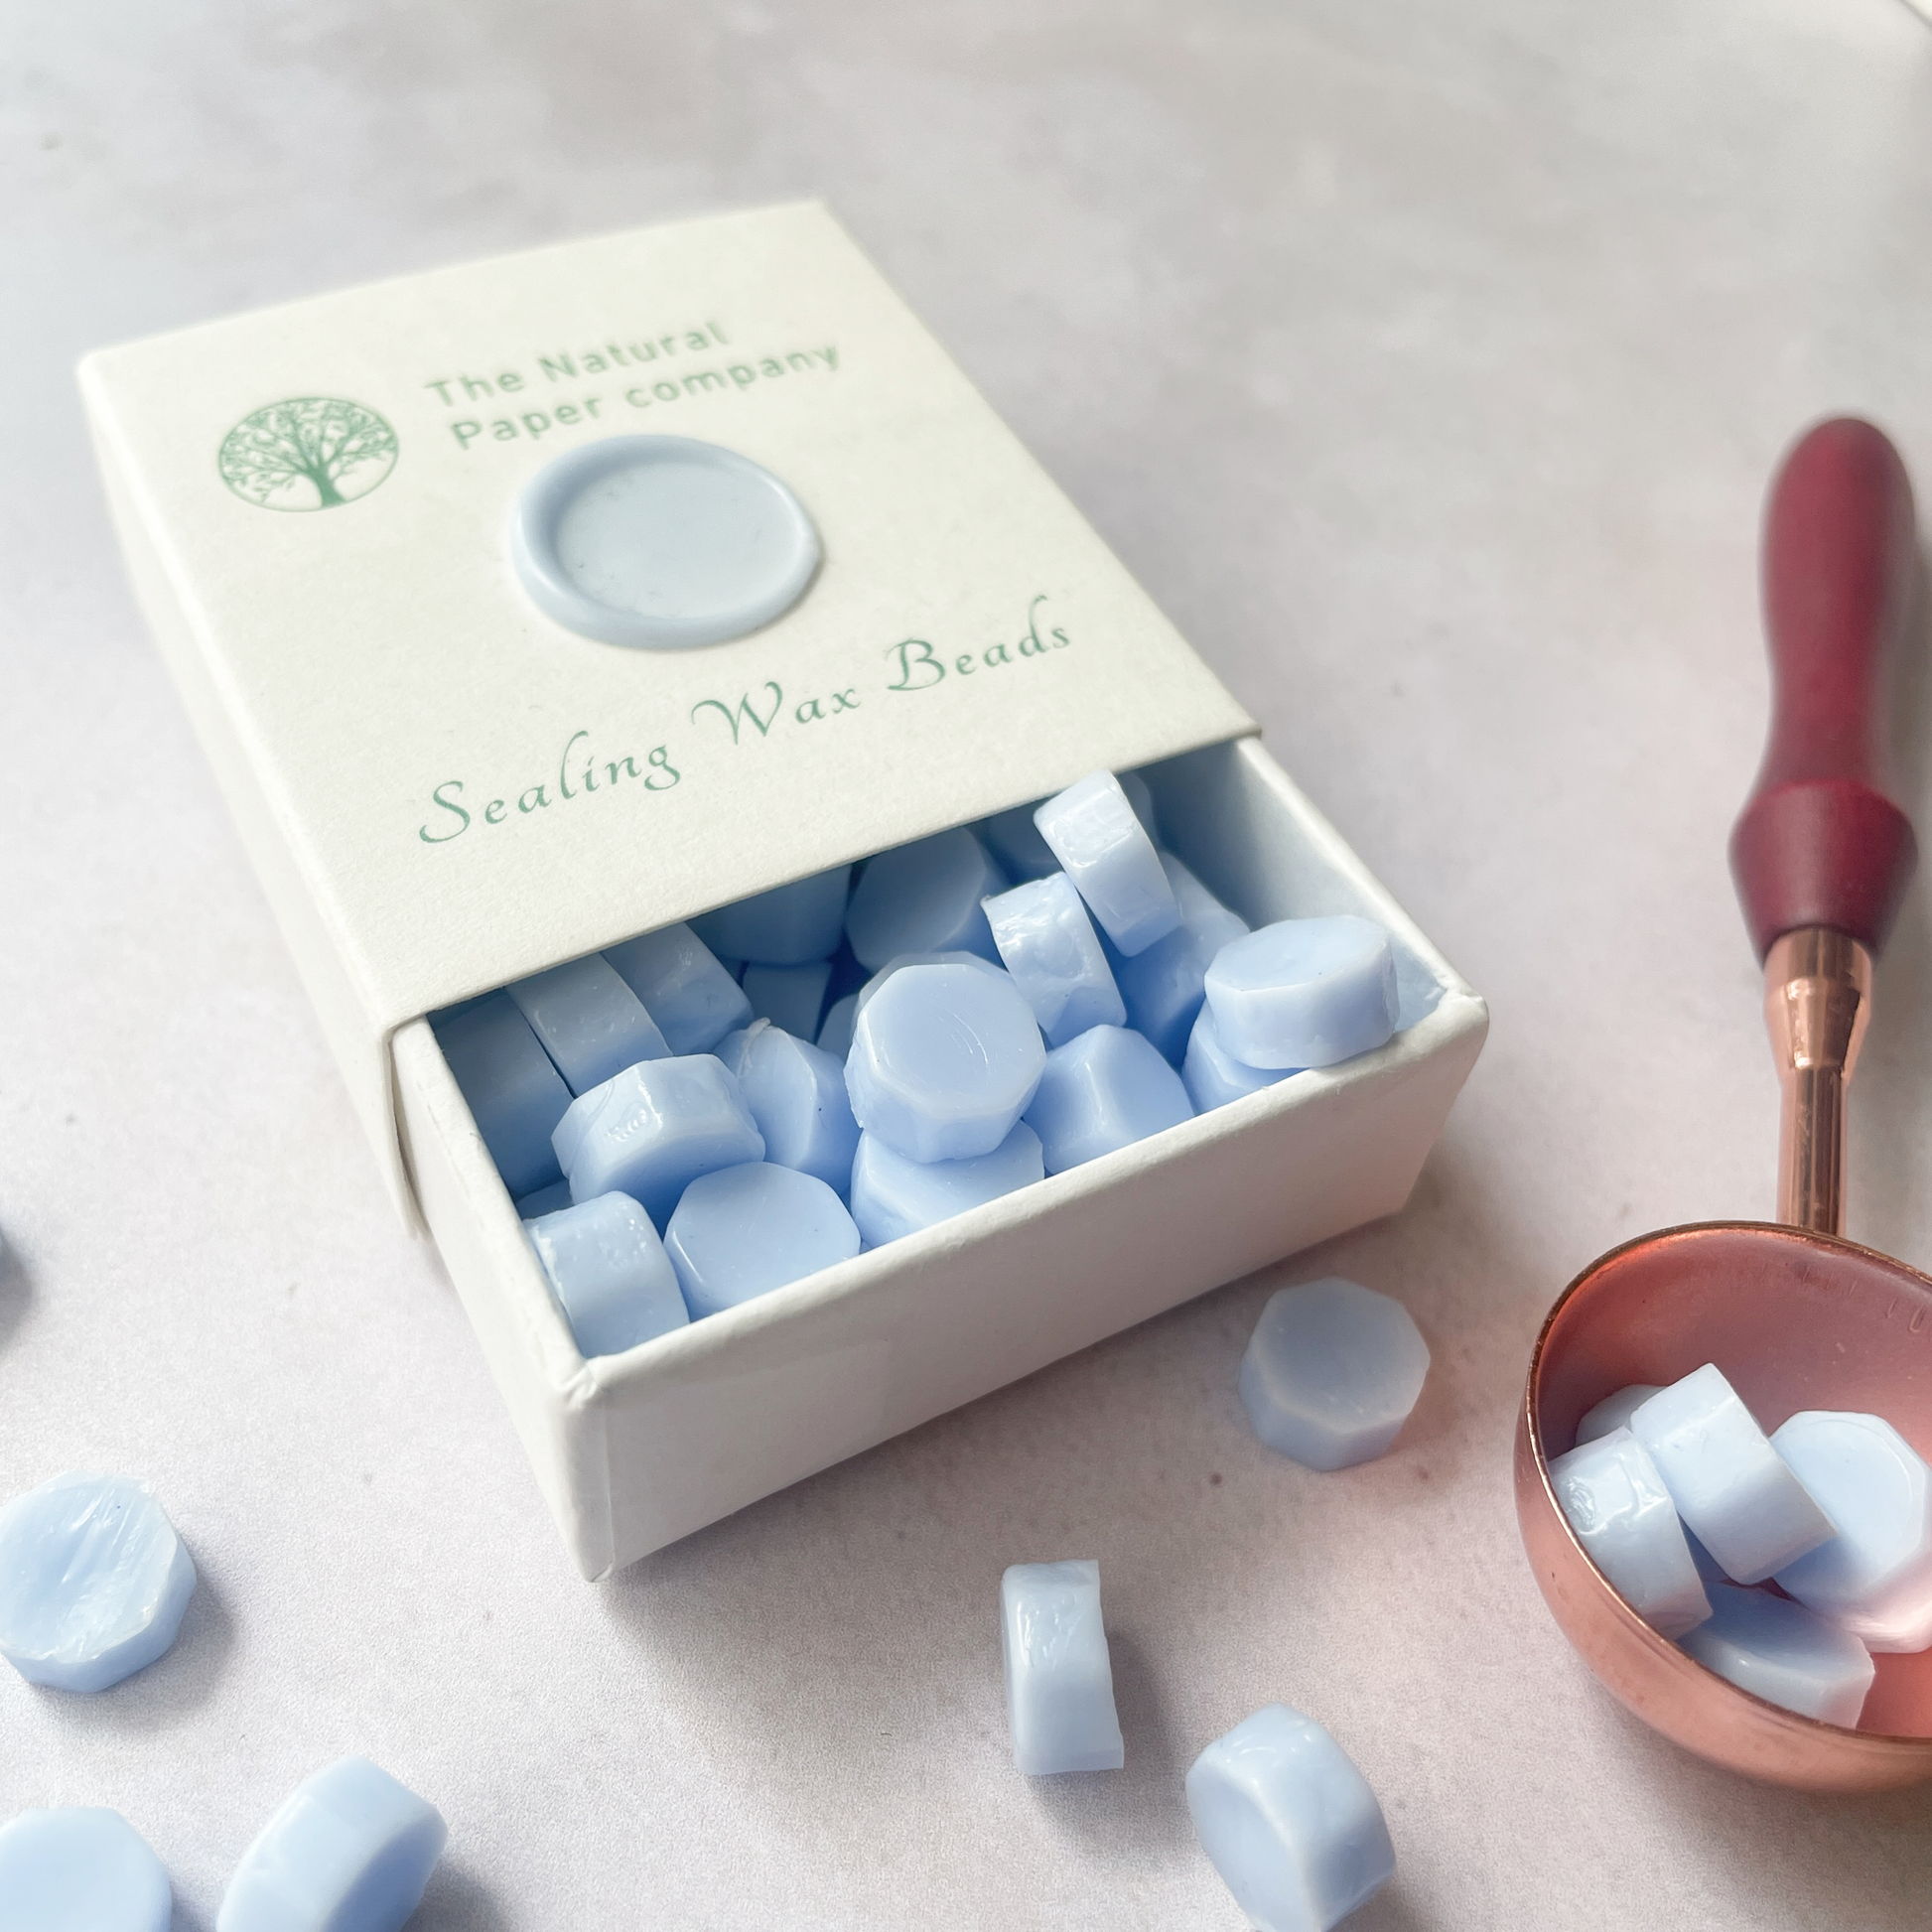 pale blue sealing wax.  eco friendly sealing wax beads in pale blue.  Wax for making wax stamps and wax seals on envelopes and stationery